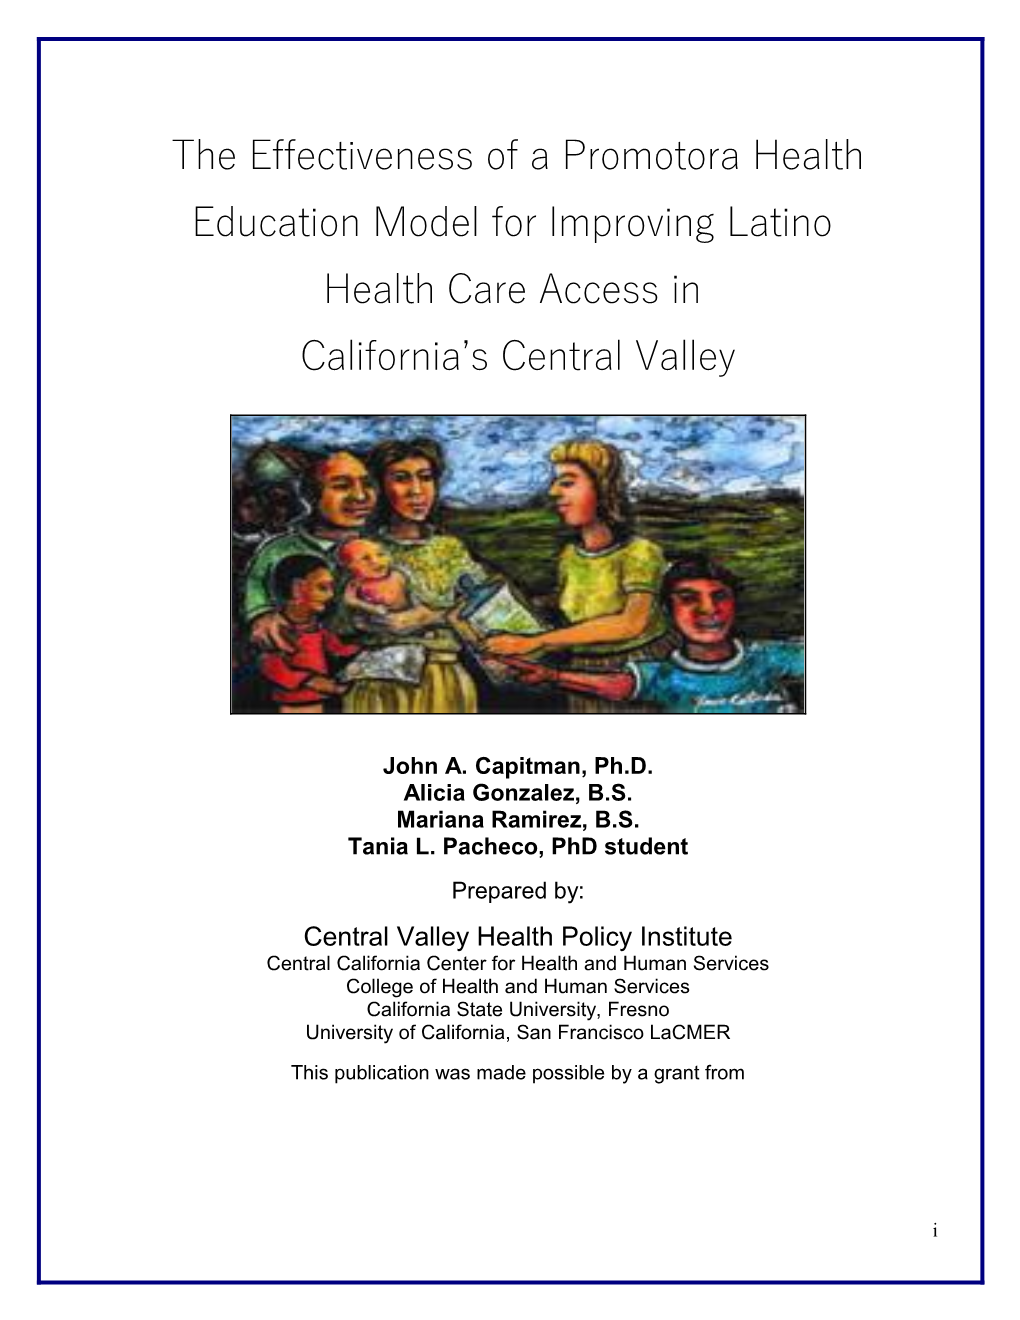 The Effectiveness of Apromotora Health Education Model for Improving Latino